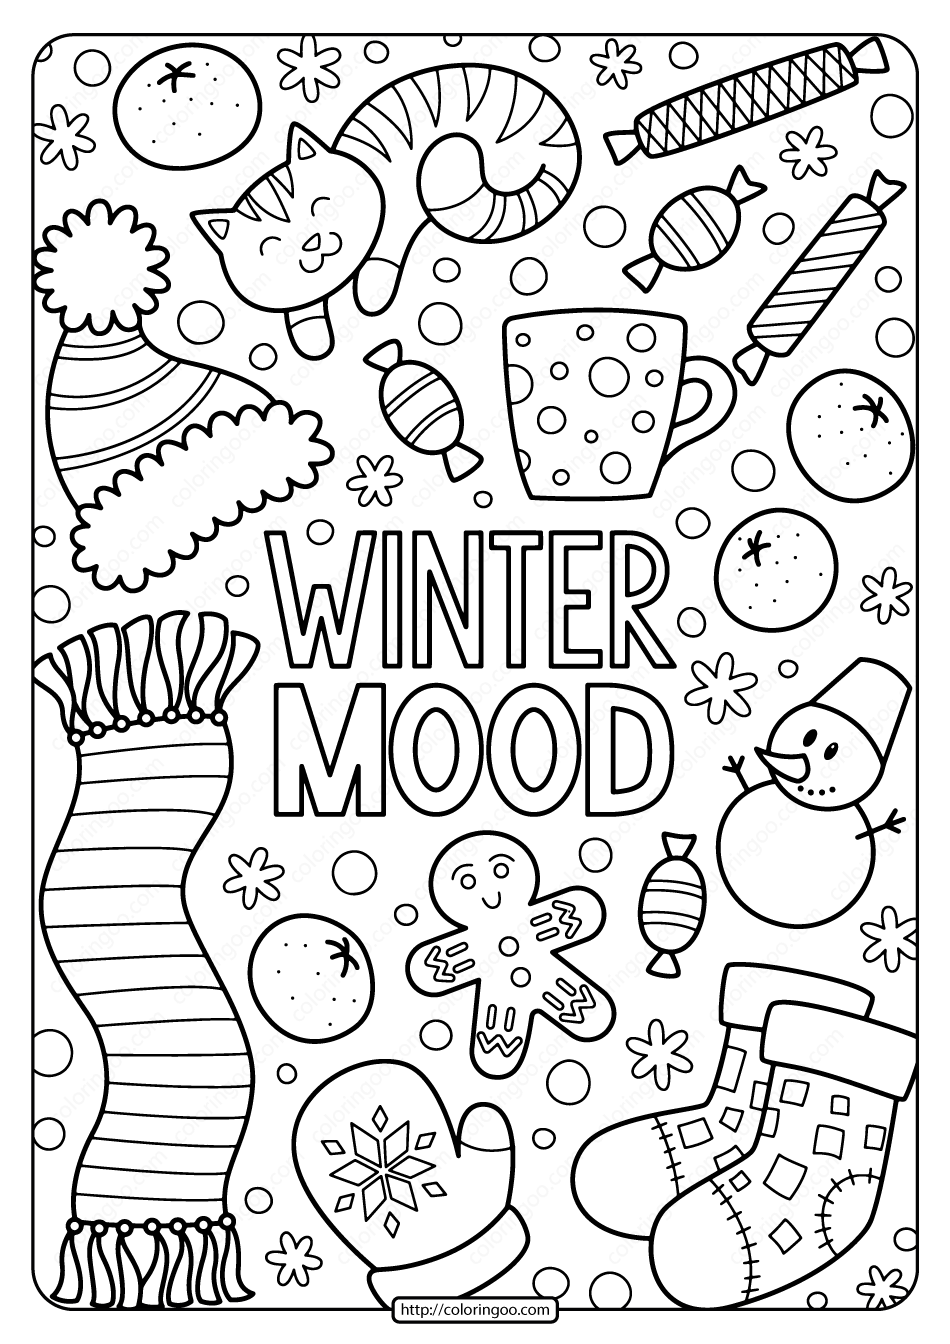 free printable coloring pages with the word winter for adults